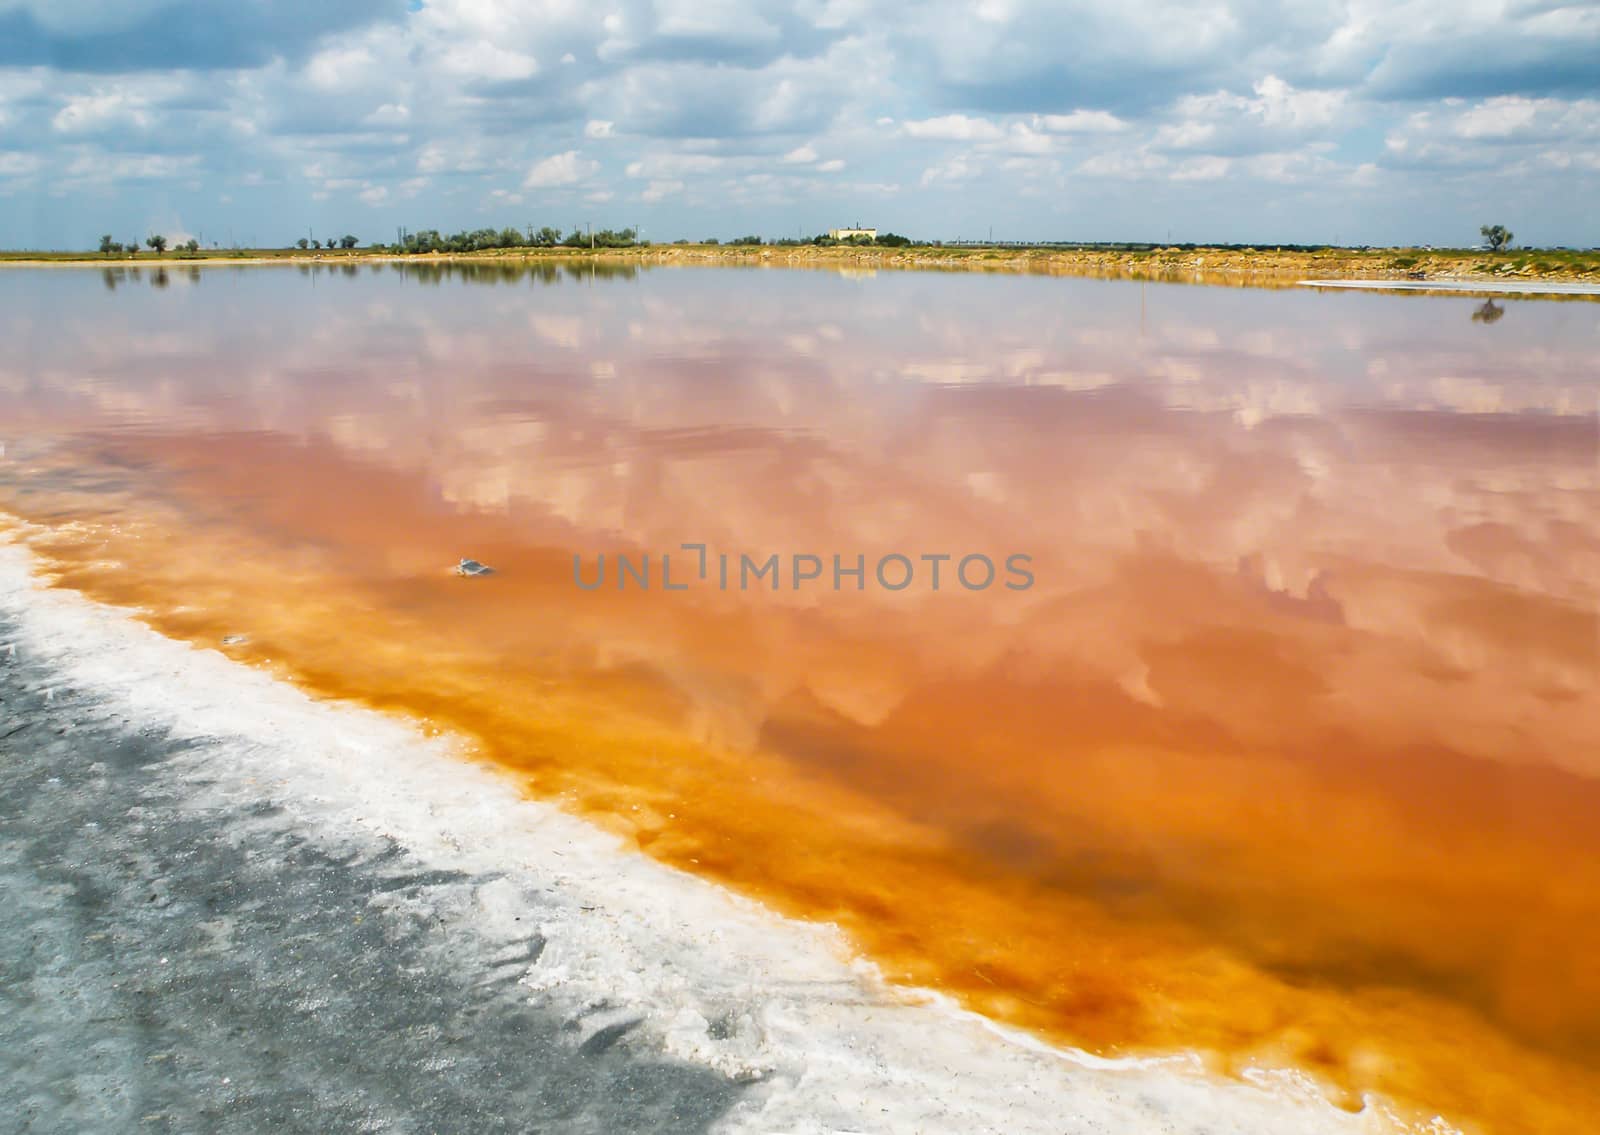 The salty shore of the lake of salt. The water looks red-orange due to a special algae that grows in high levels of salt.